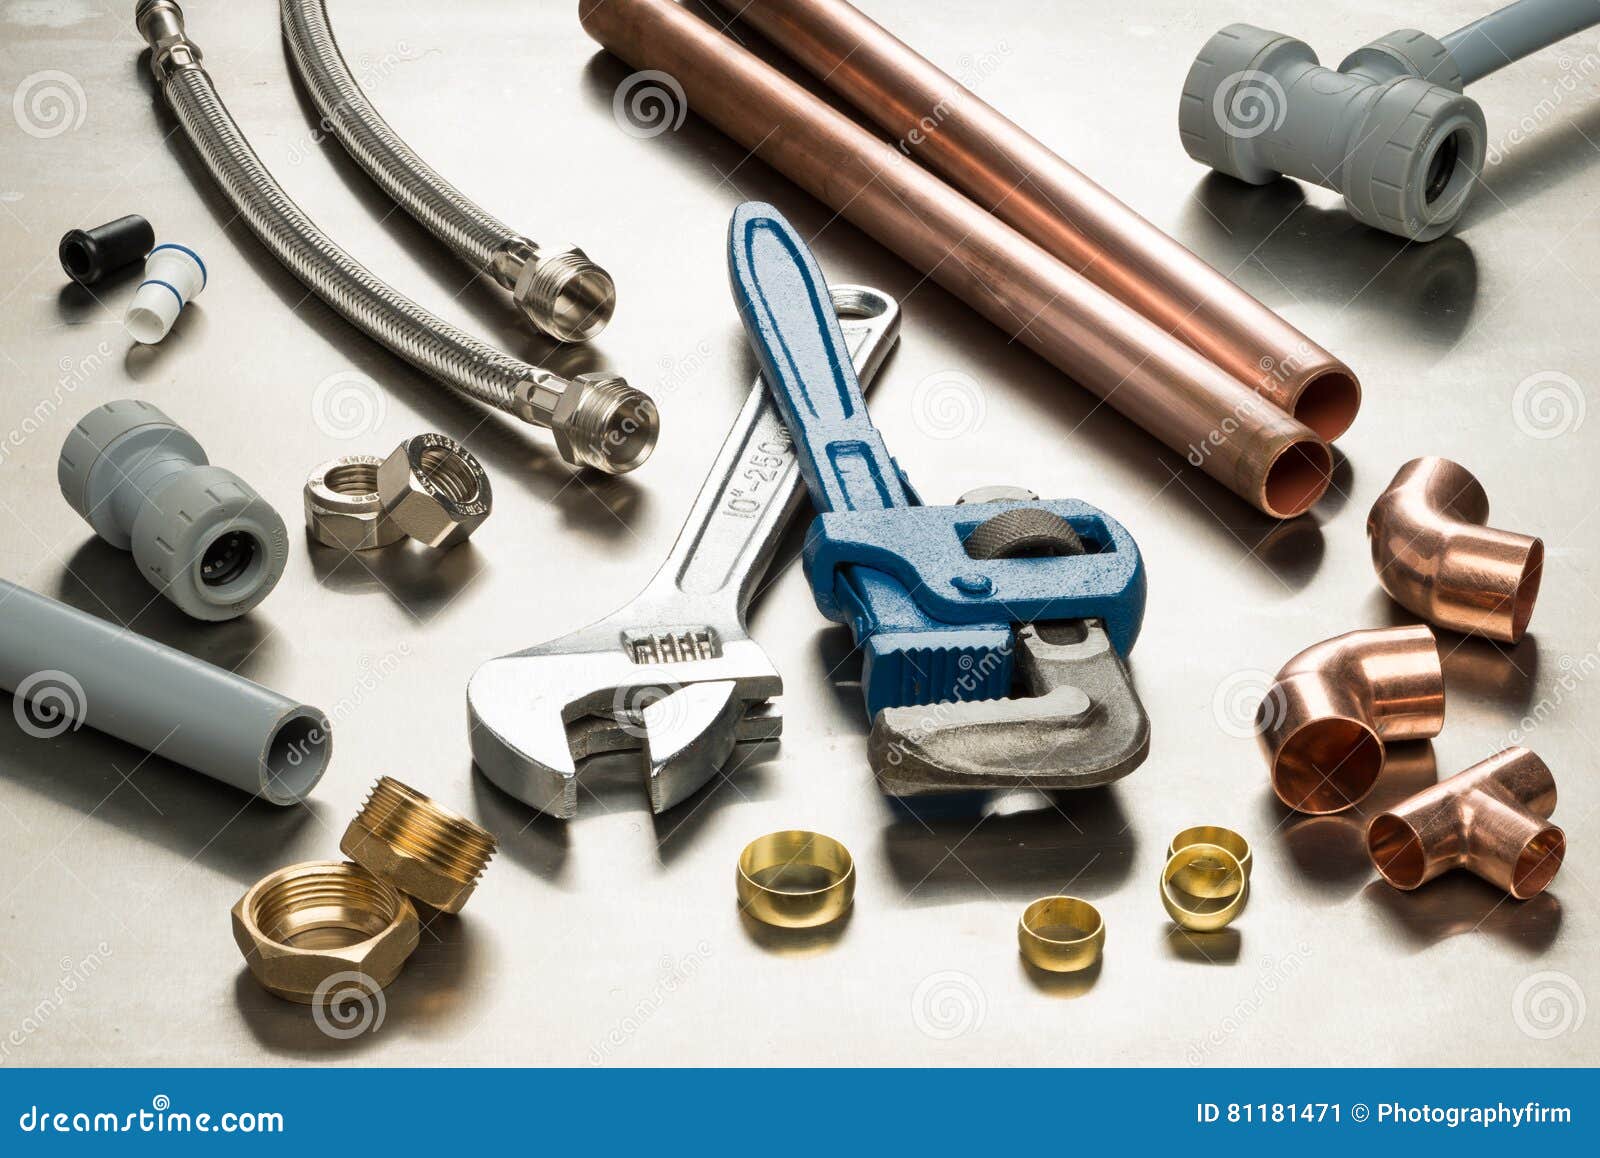 selection of plumbers tools and plumbing materials